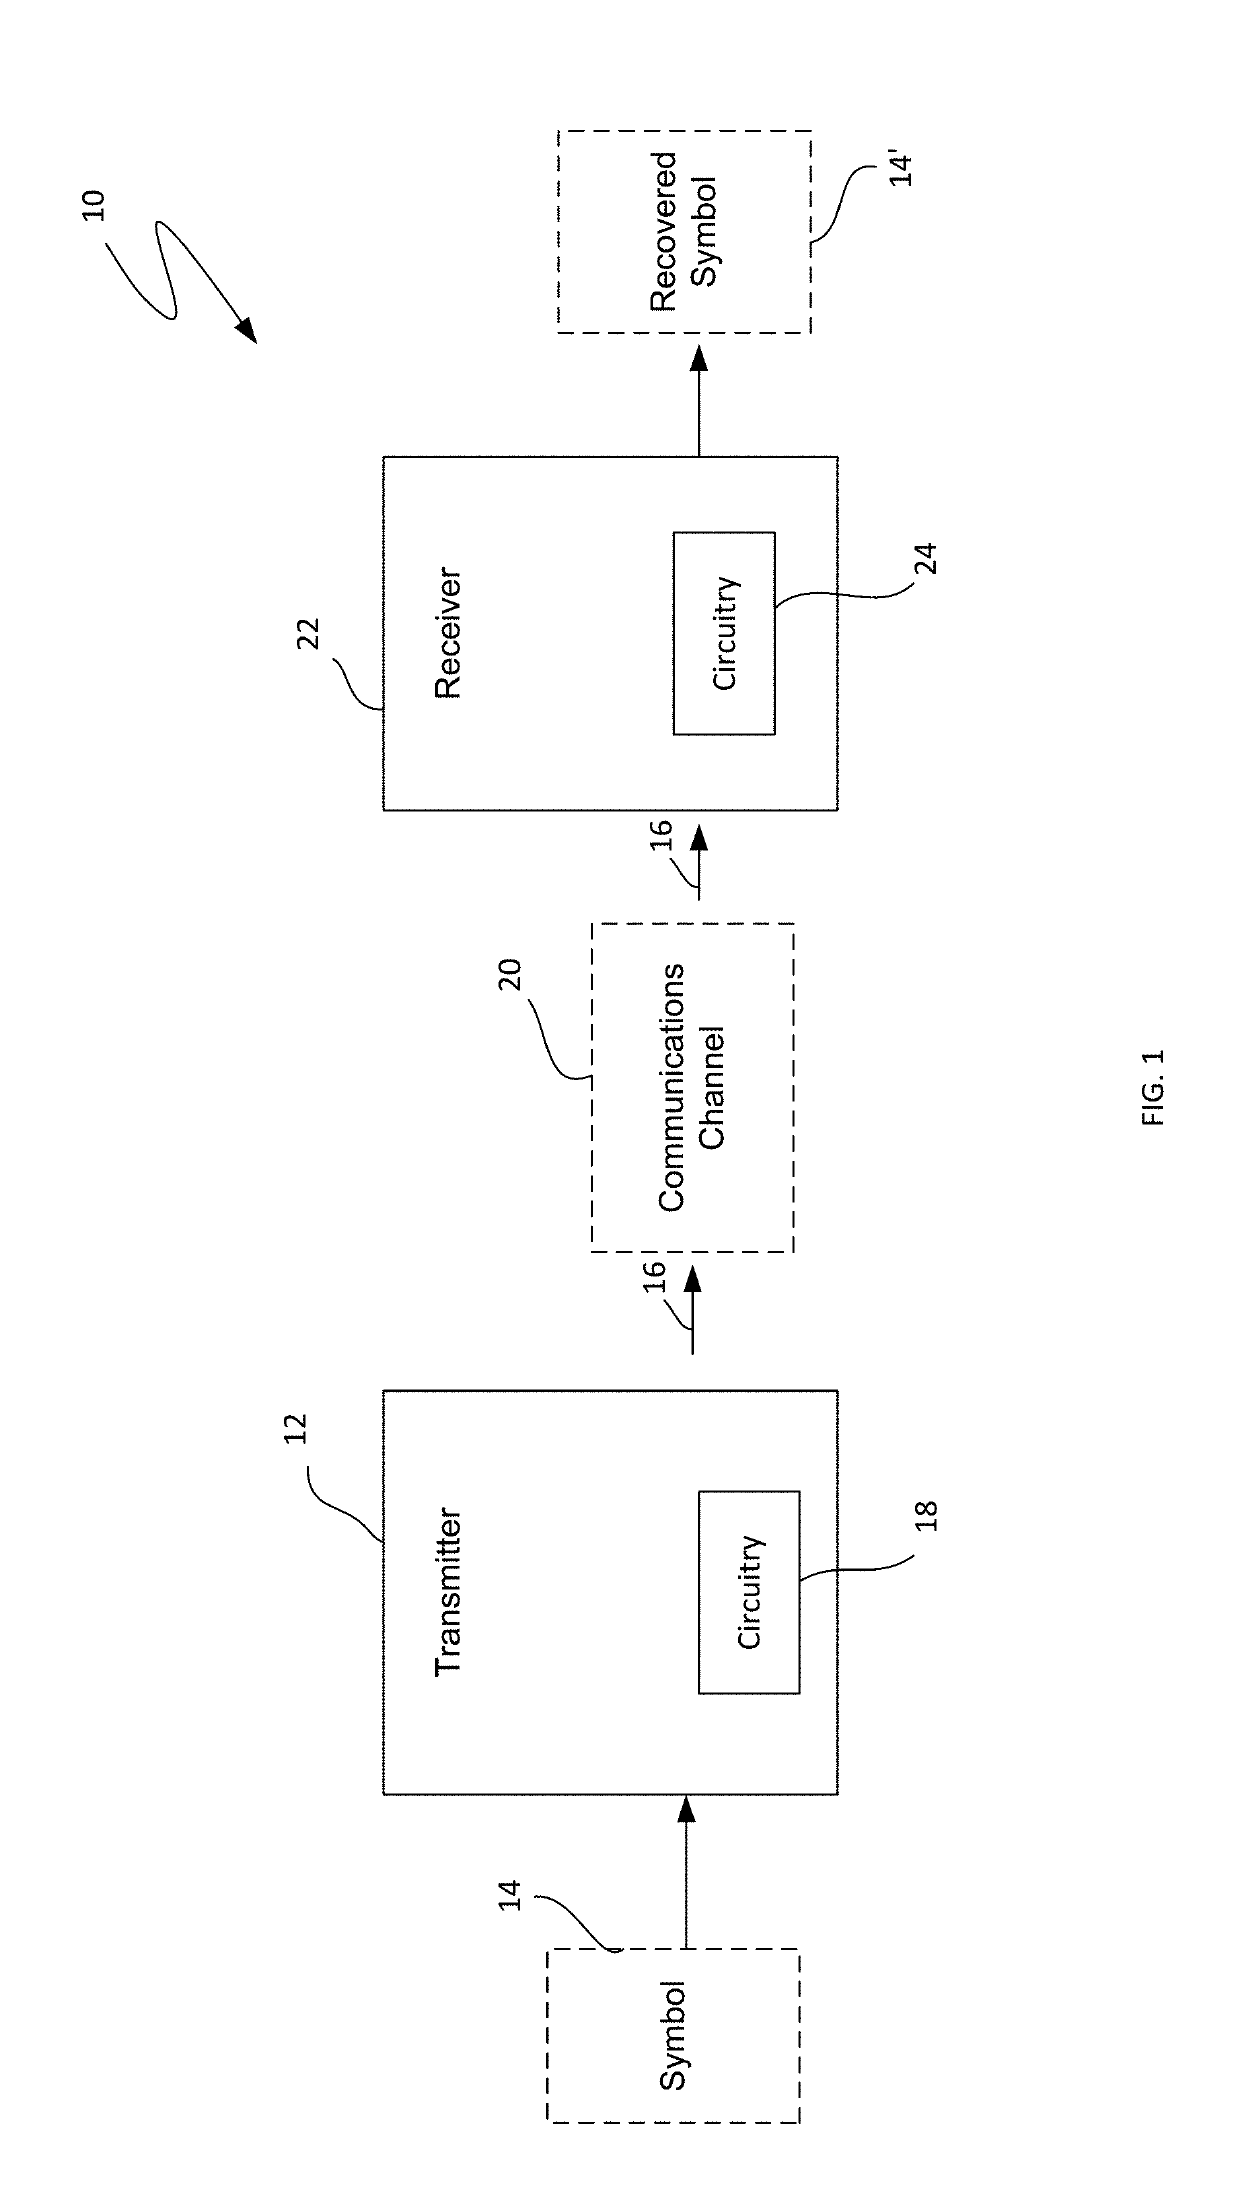 Receiver for high spectral efficiency data communications system using encoded sinusoidal waveforms